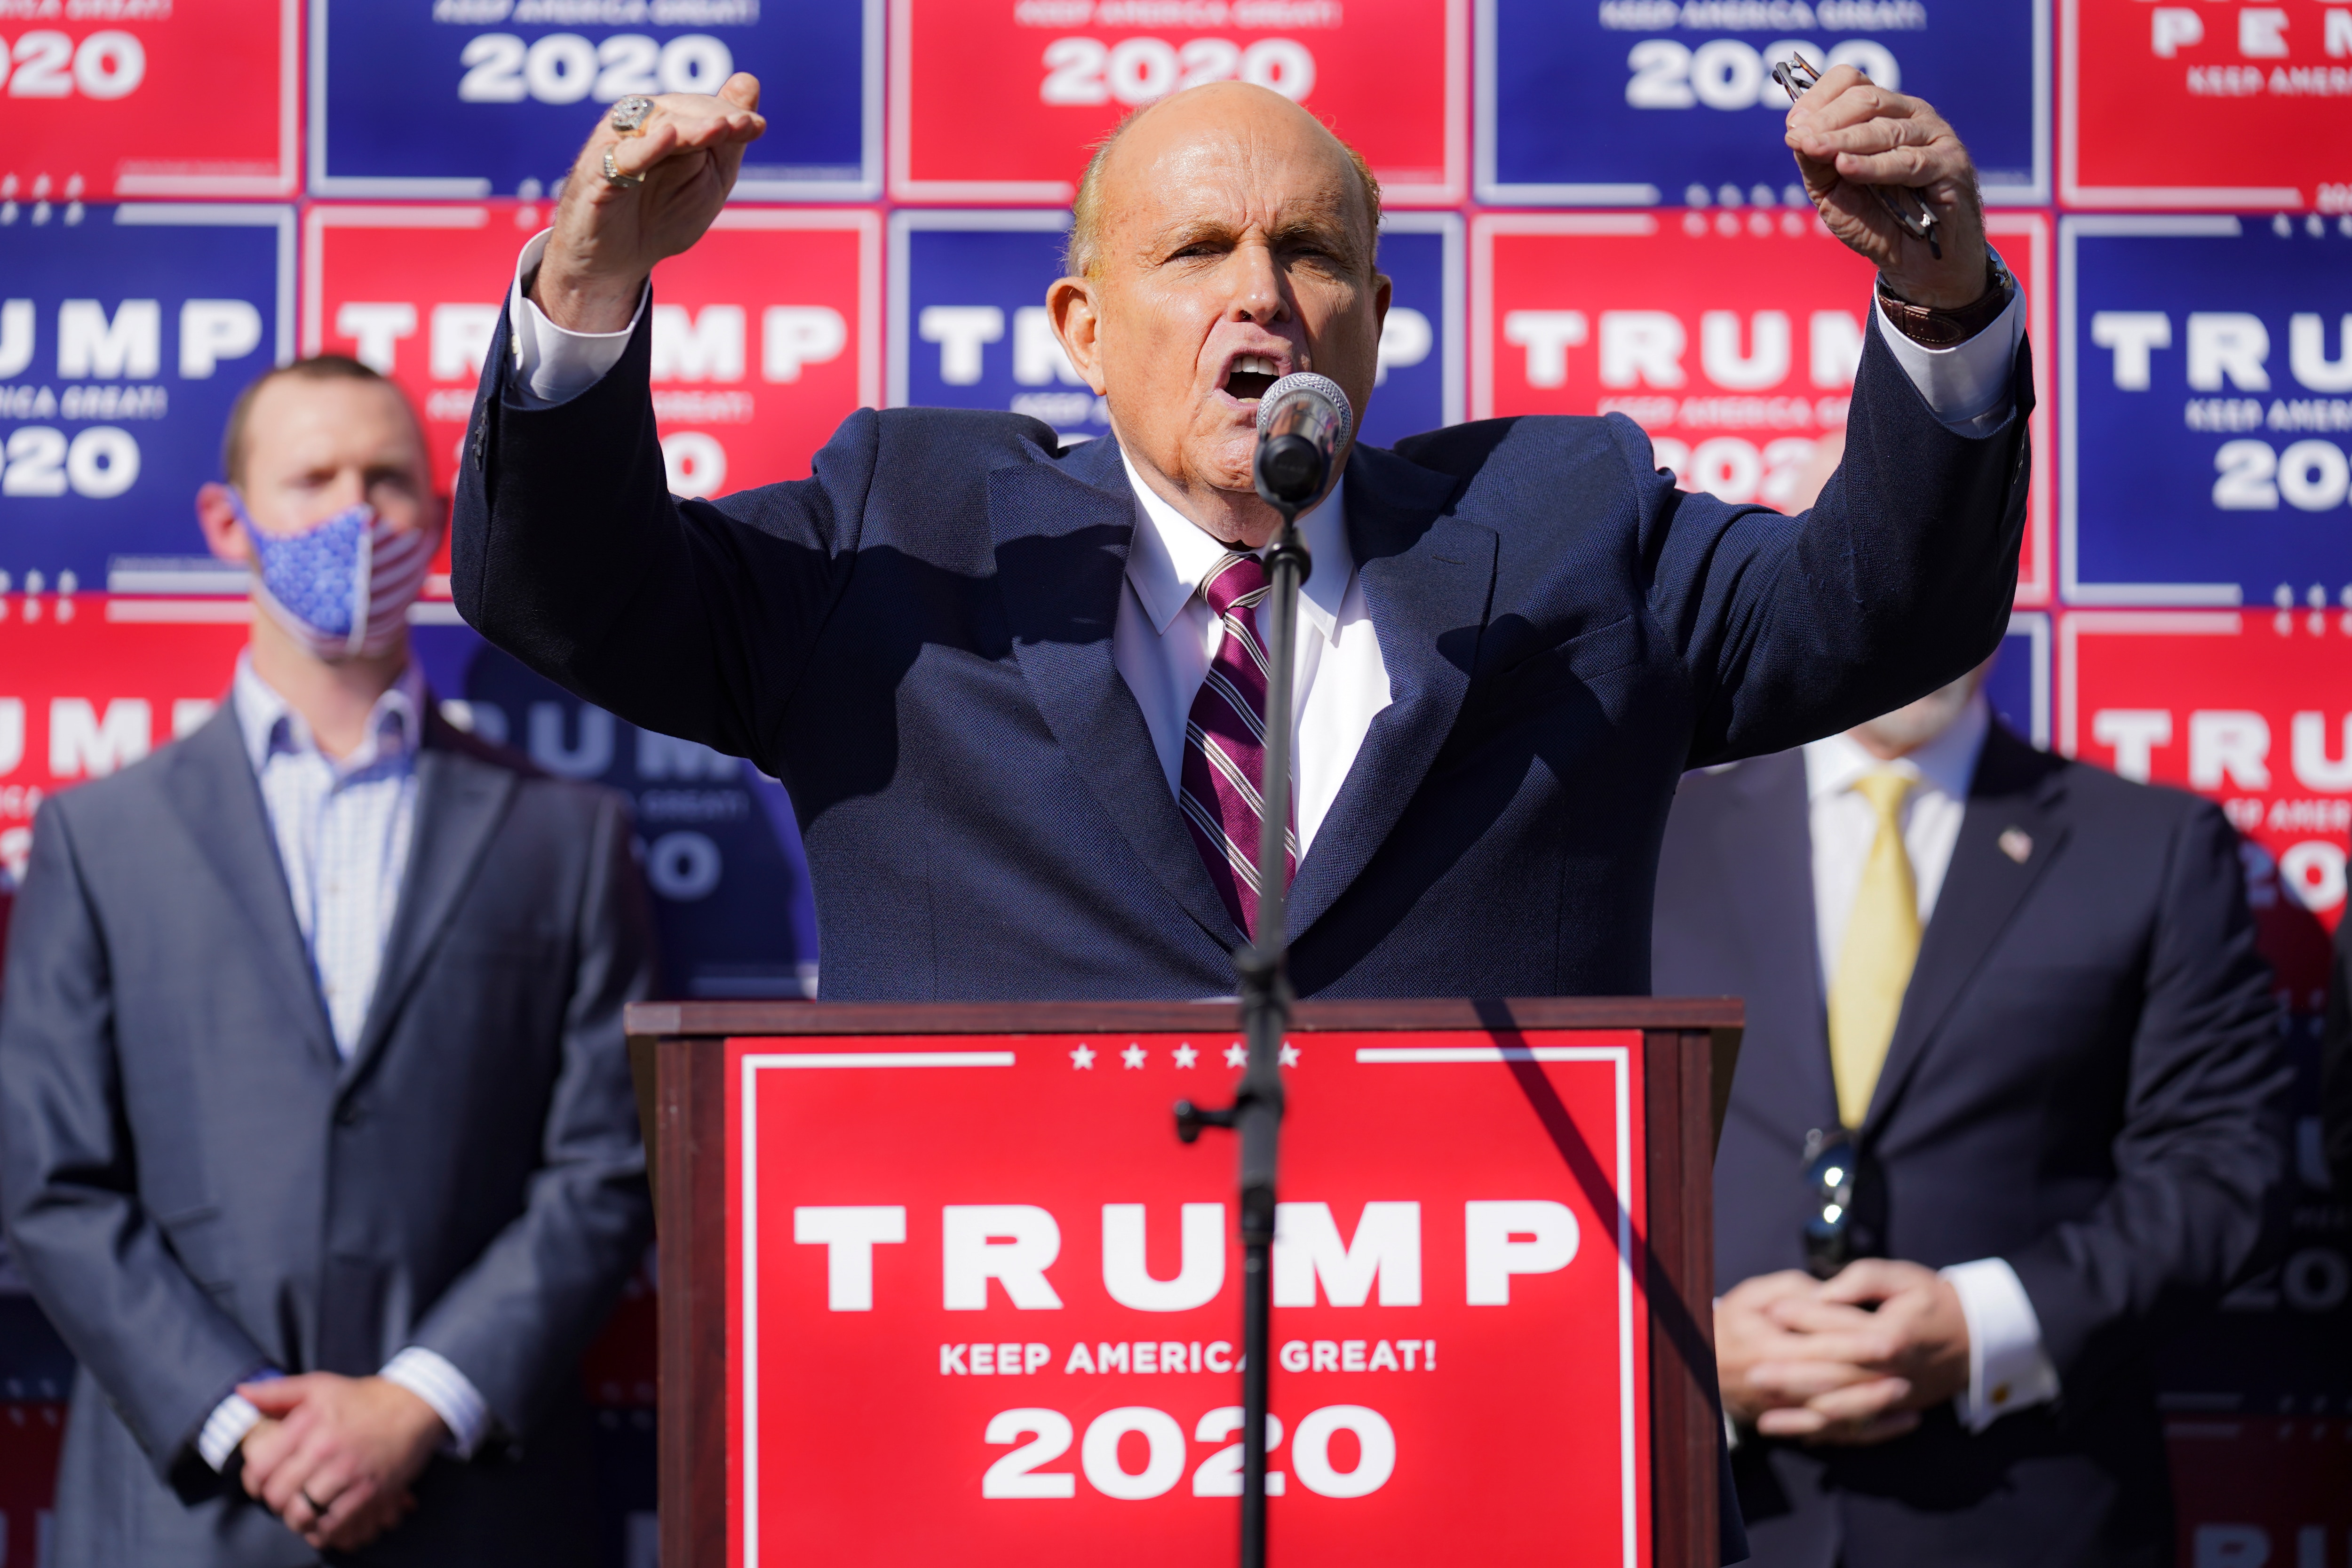 Former New York mayor Rudy Giuliani, a lawyer for President Donald Trump, speaks during a news conference on legal challenges to vote counting in Pennsylvania.